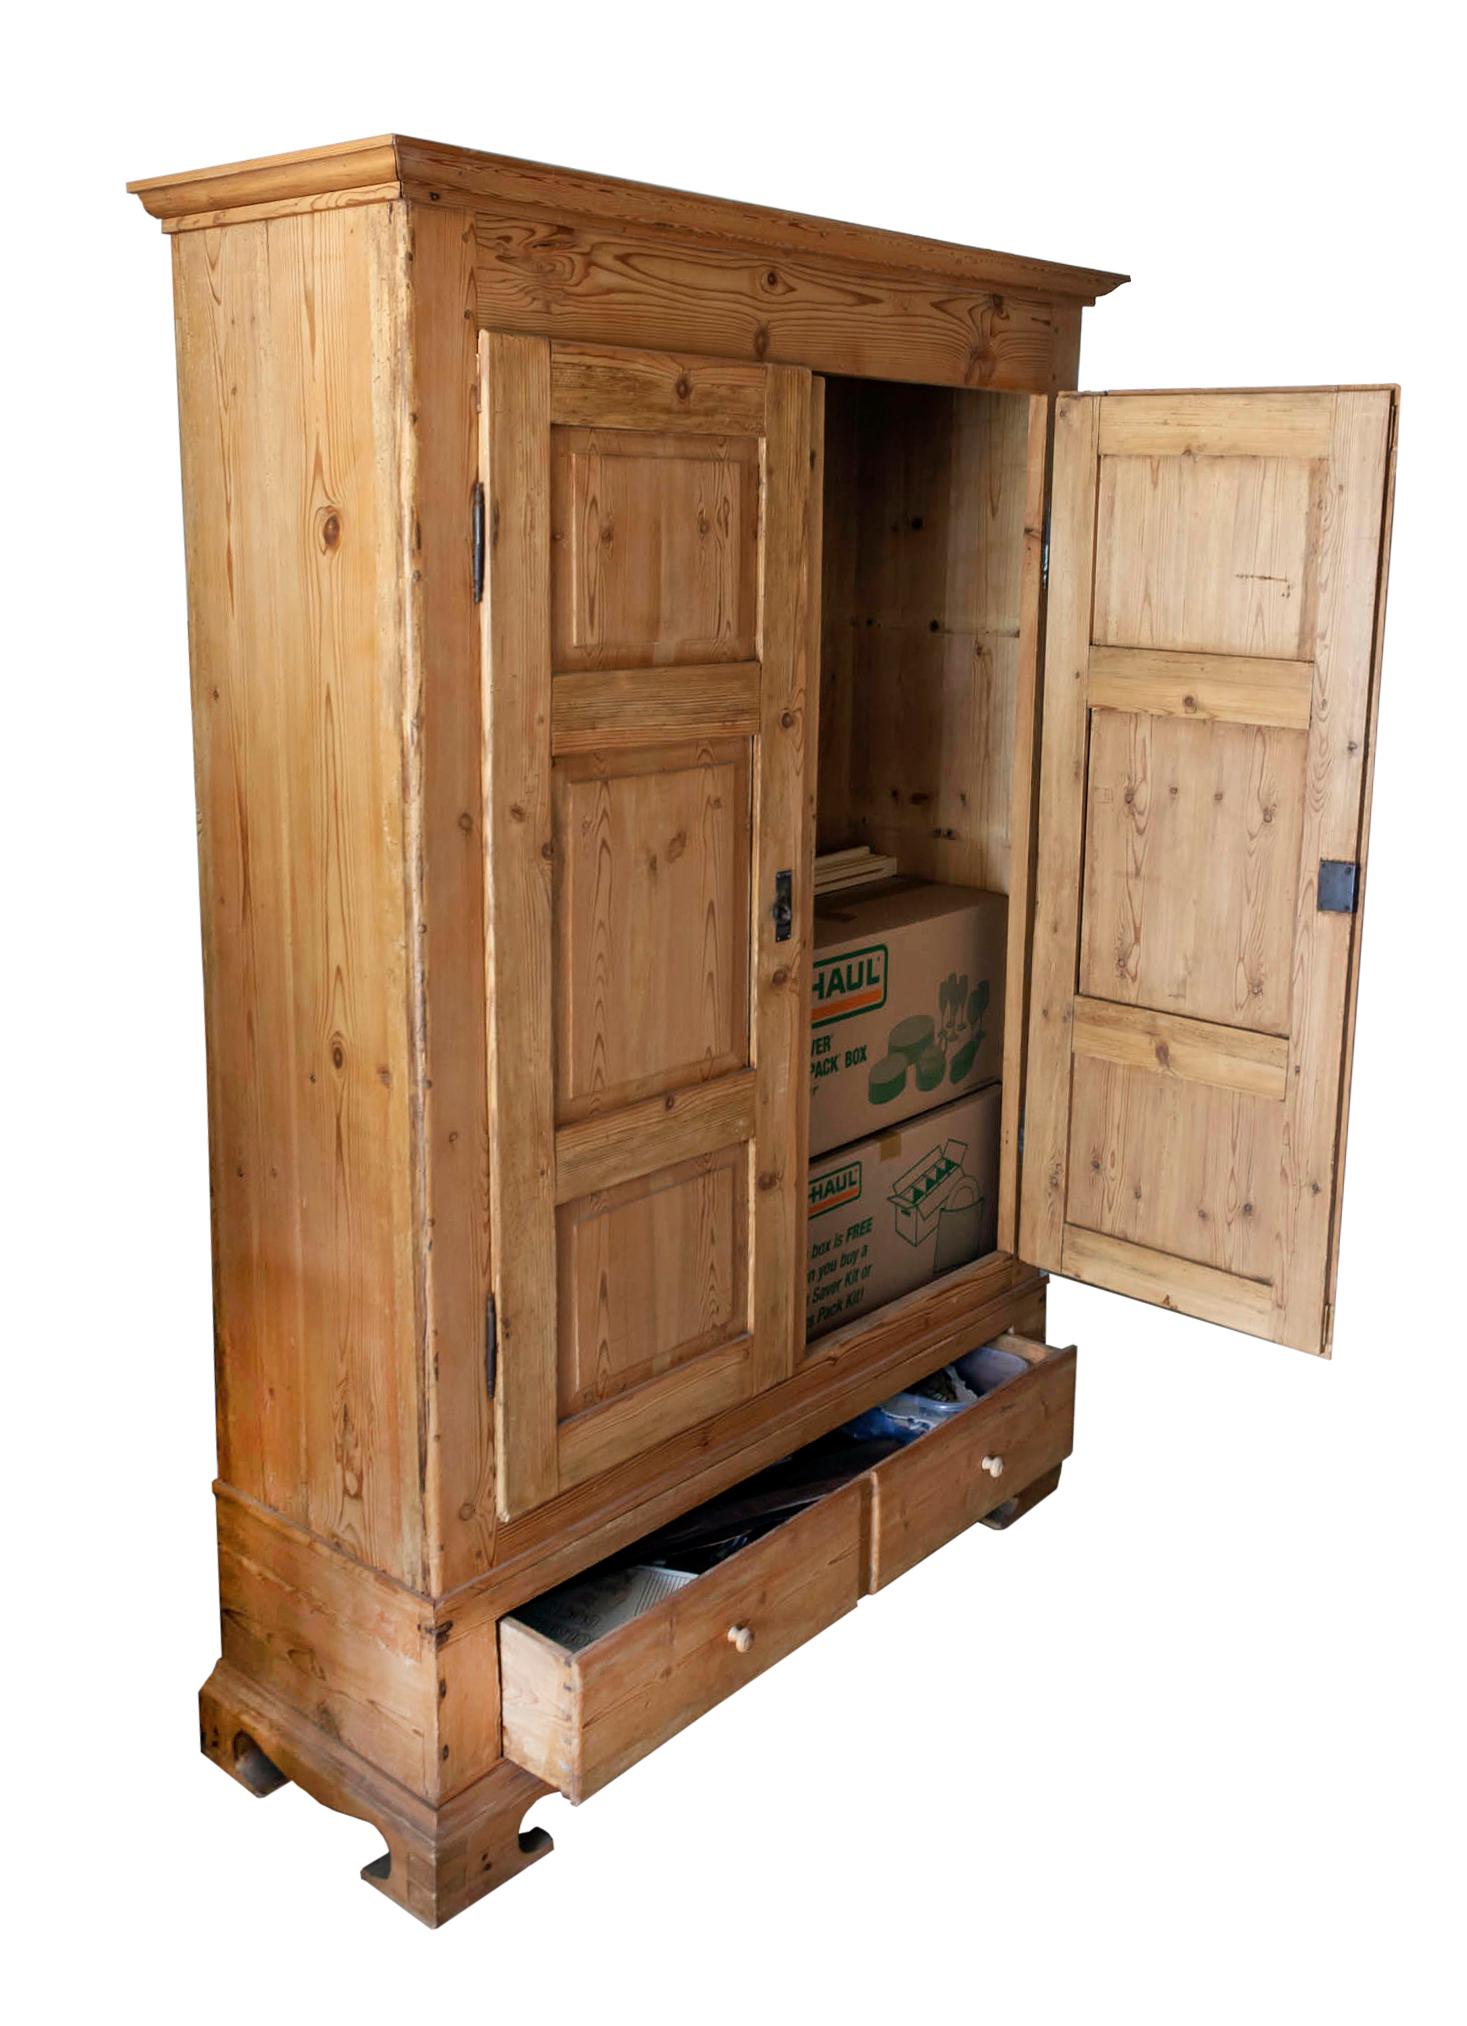 19thC European blonde pine armoire with two doors & a roomy bottom drawers.
Recessed panels on the doors. The bottom drawers appear to be 2 draws with center recess.